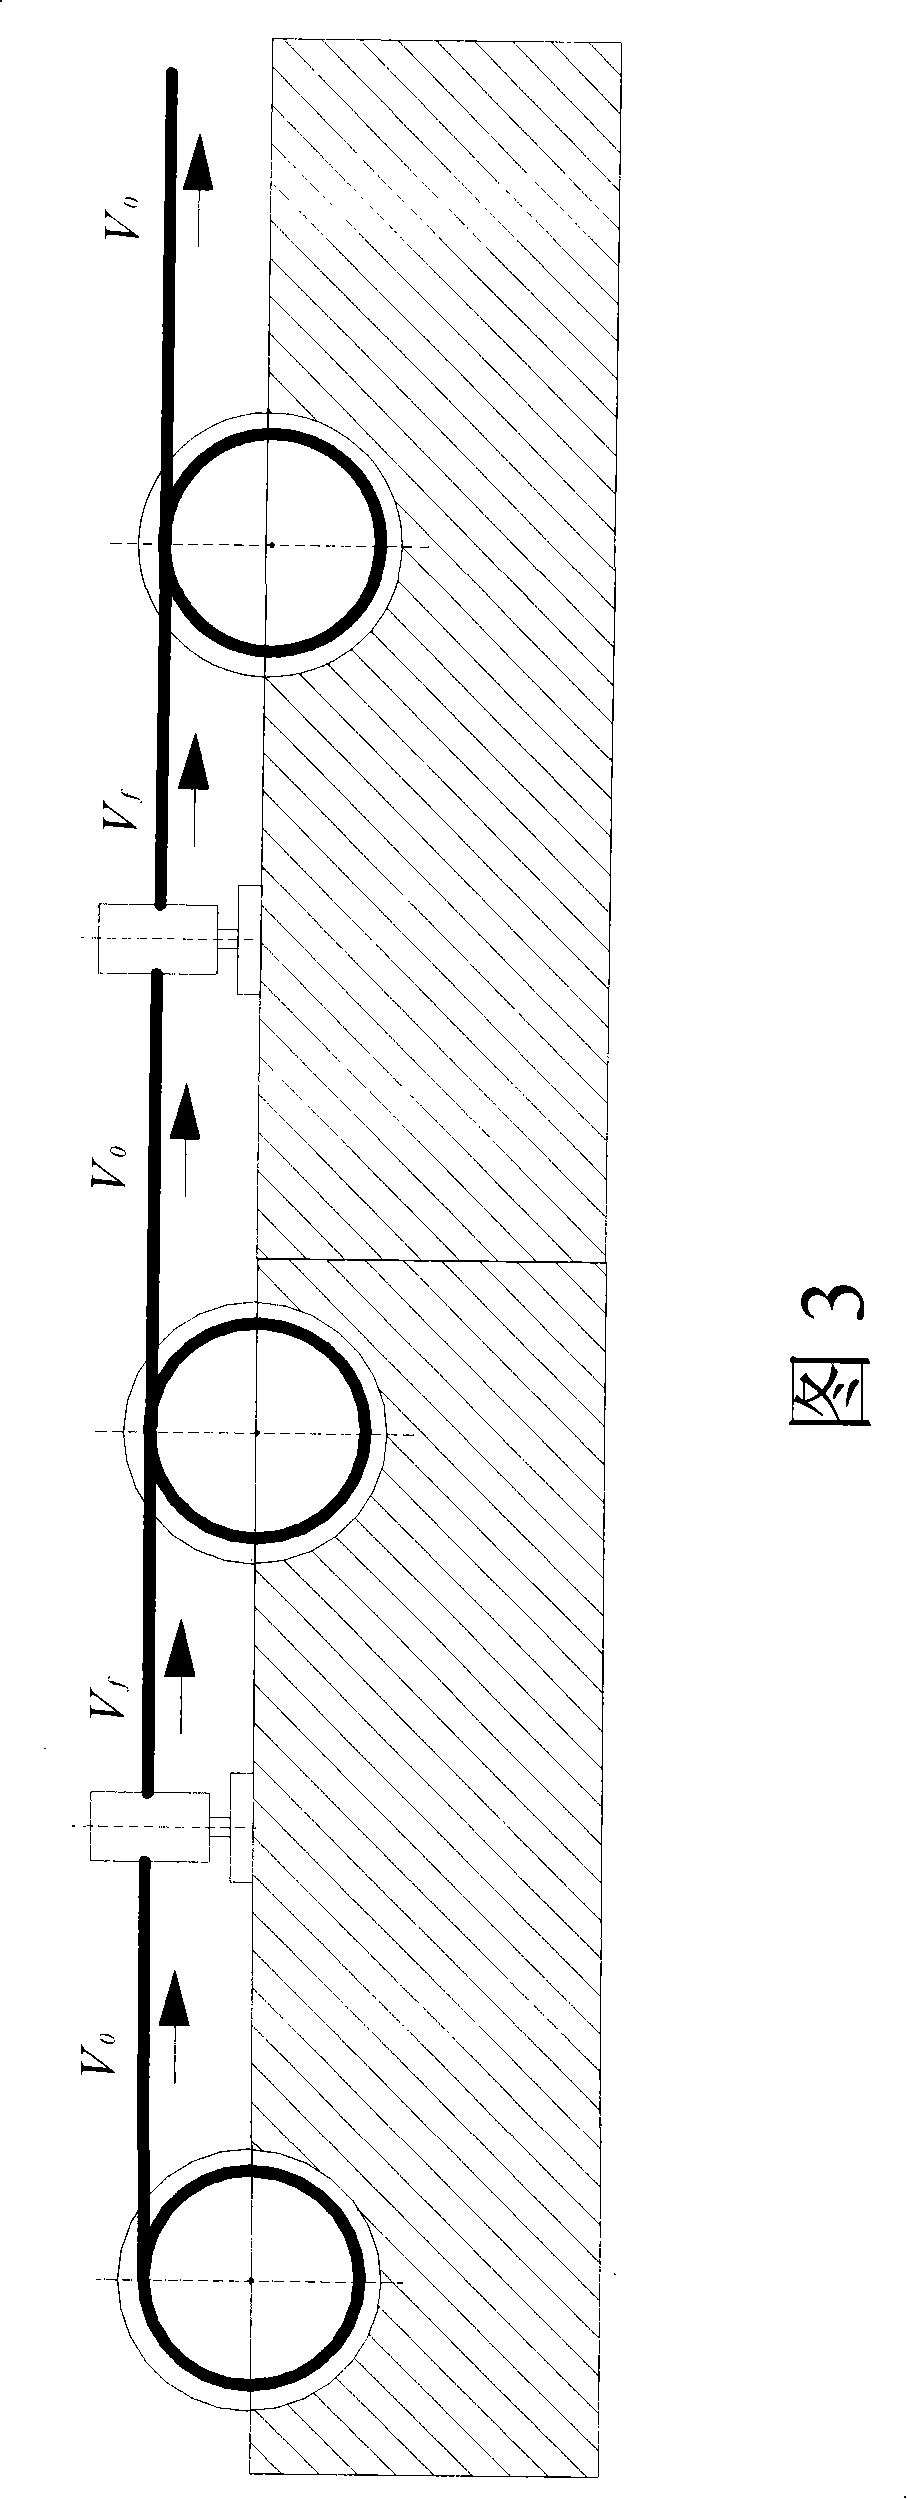 Non-mould drawing forming method and apparatus